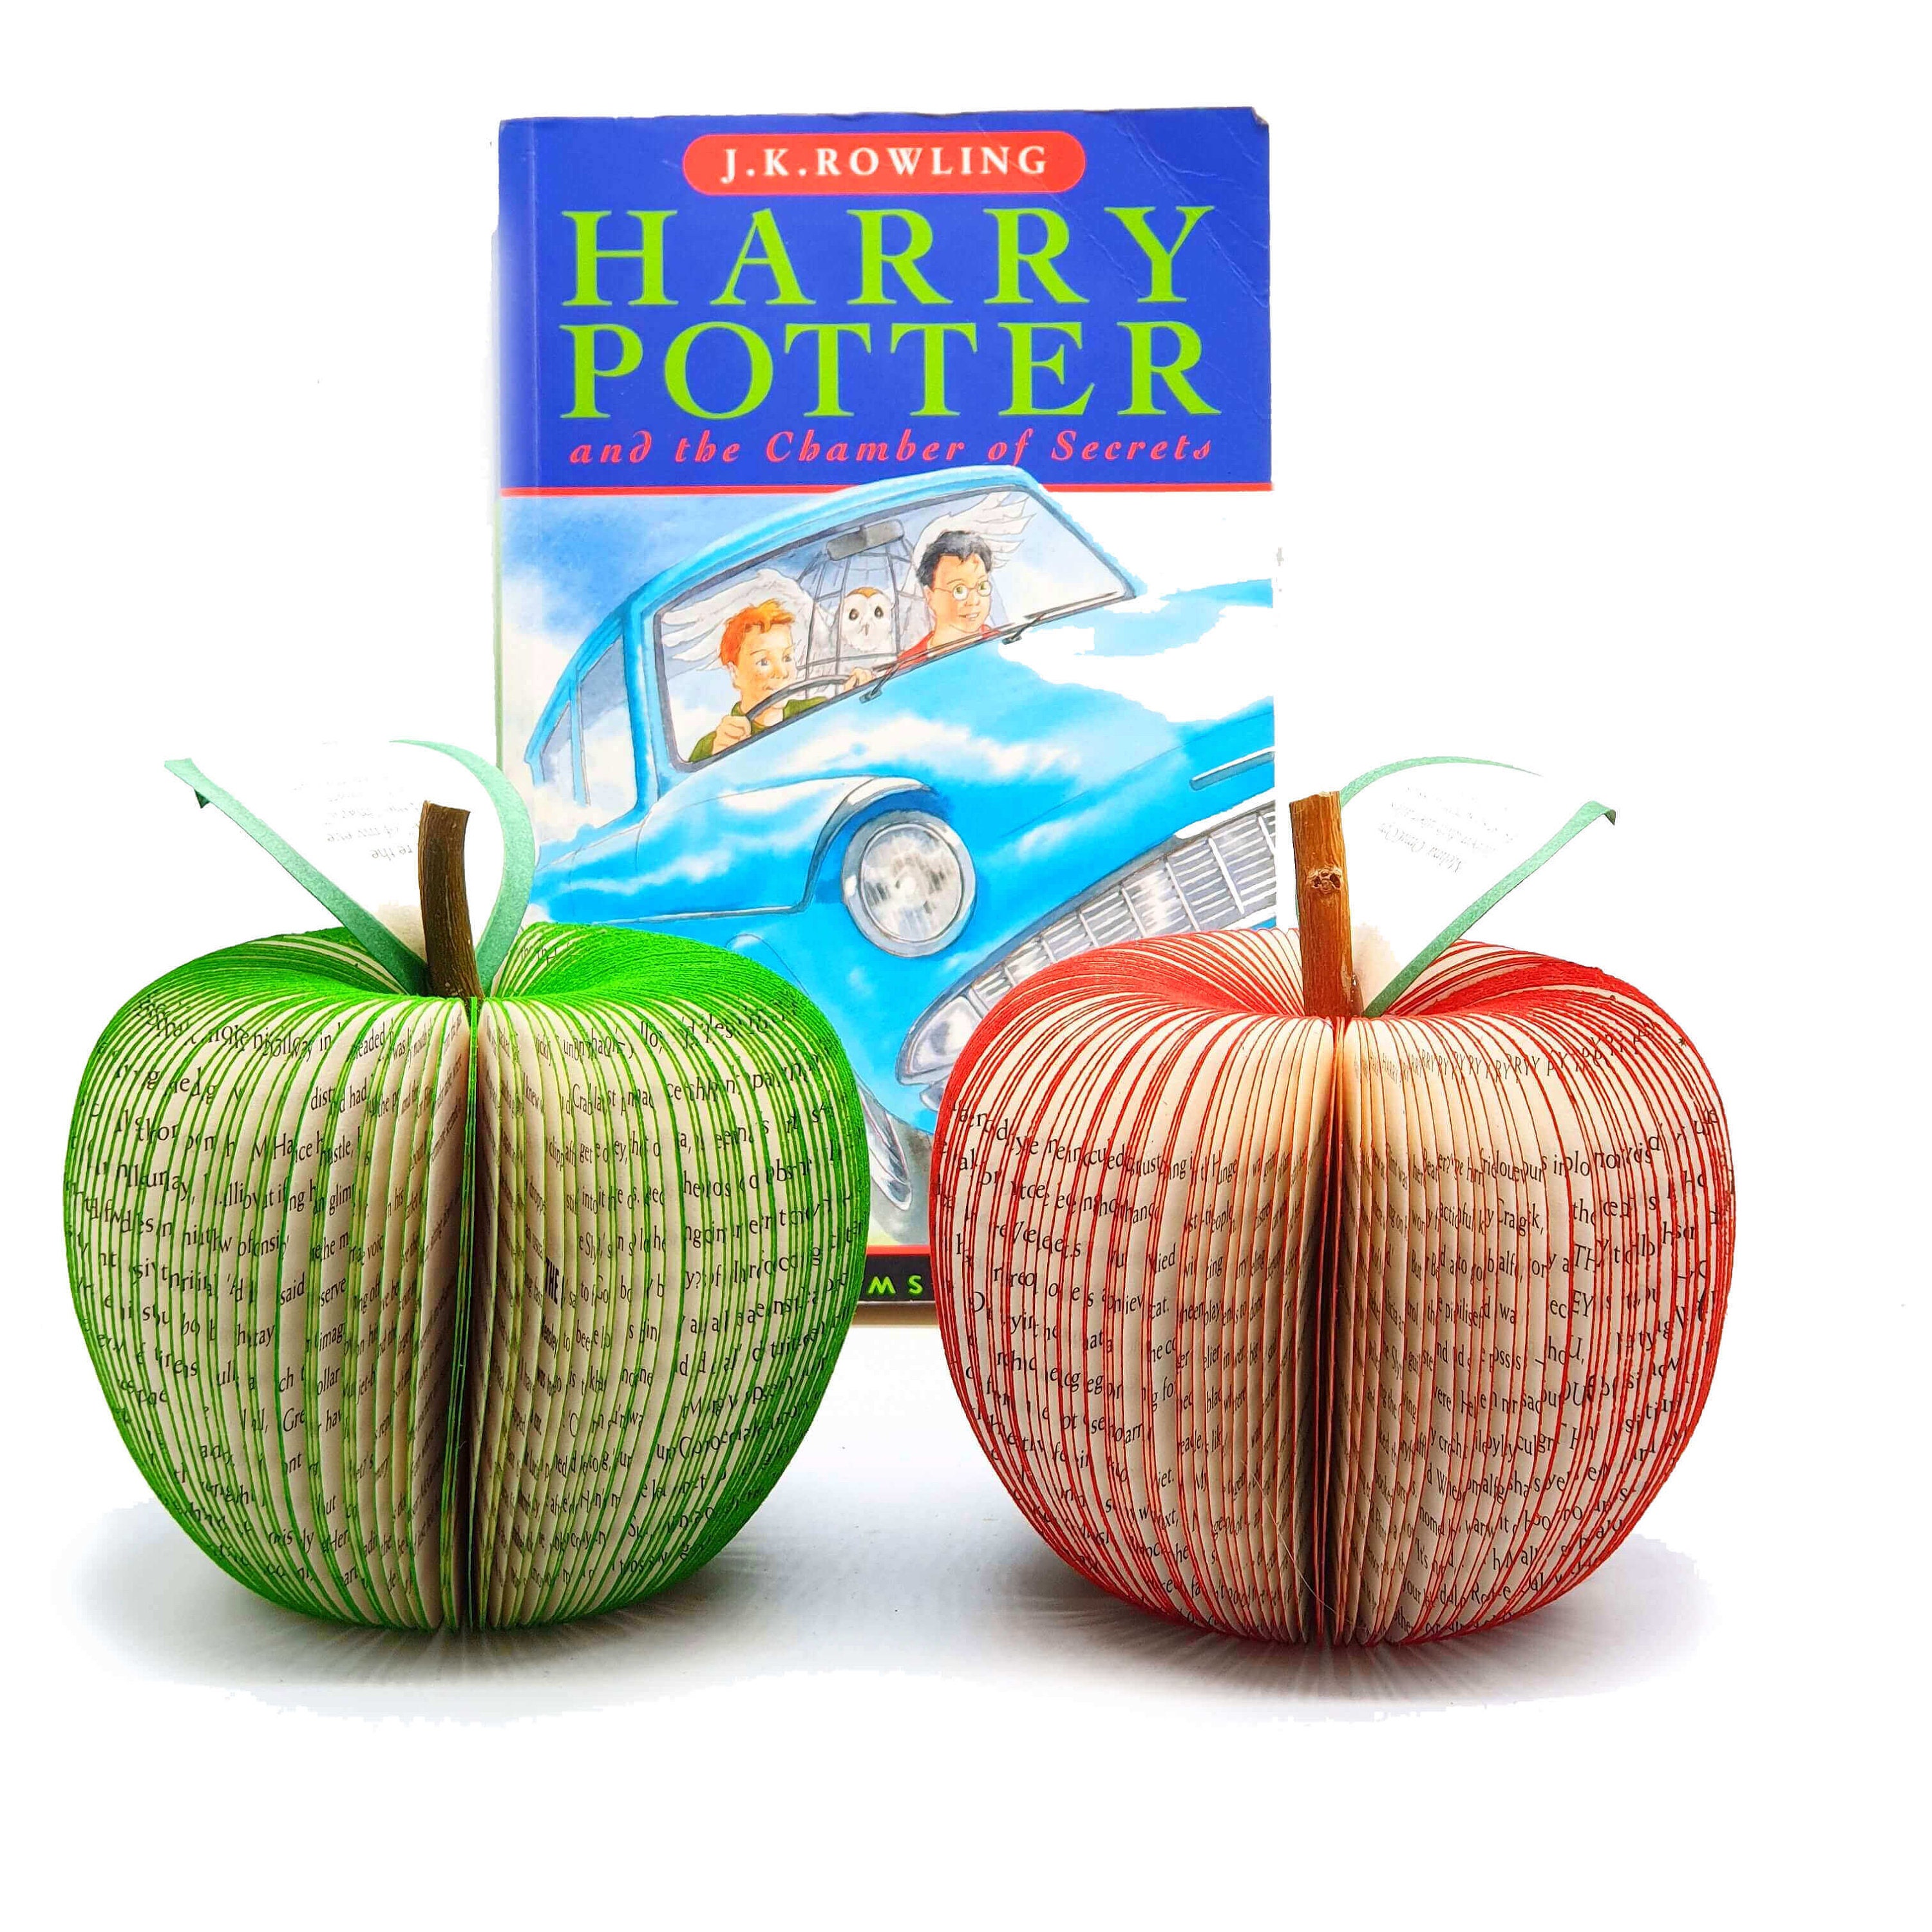 Harry Potter Gift Personalised Harry Potter Gift Book Art Apple  Personalized Apple Red Apple Handmade From a Harry Potter Book -  UK